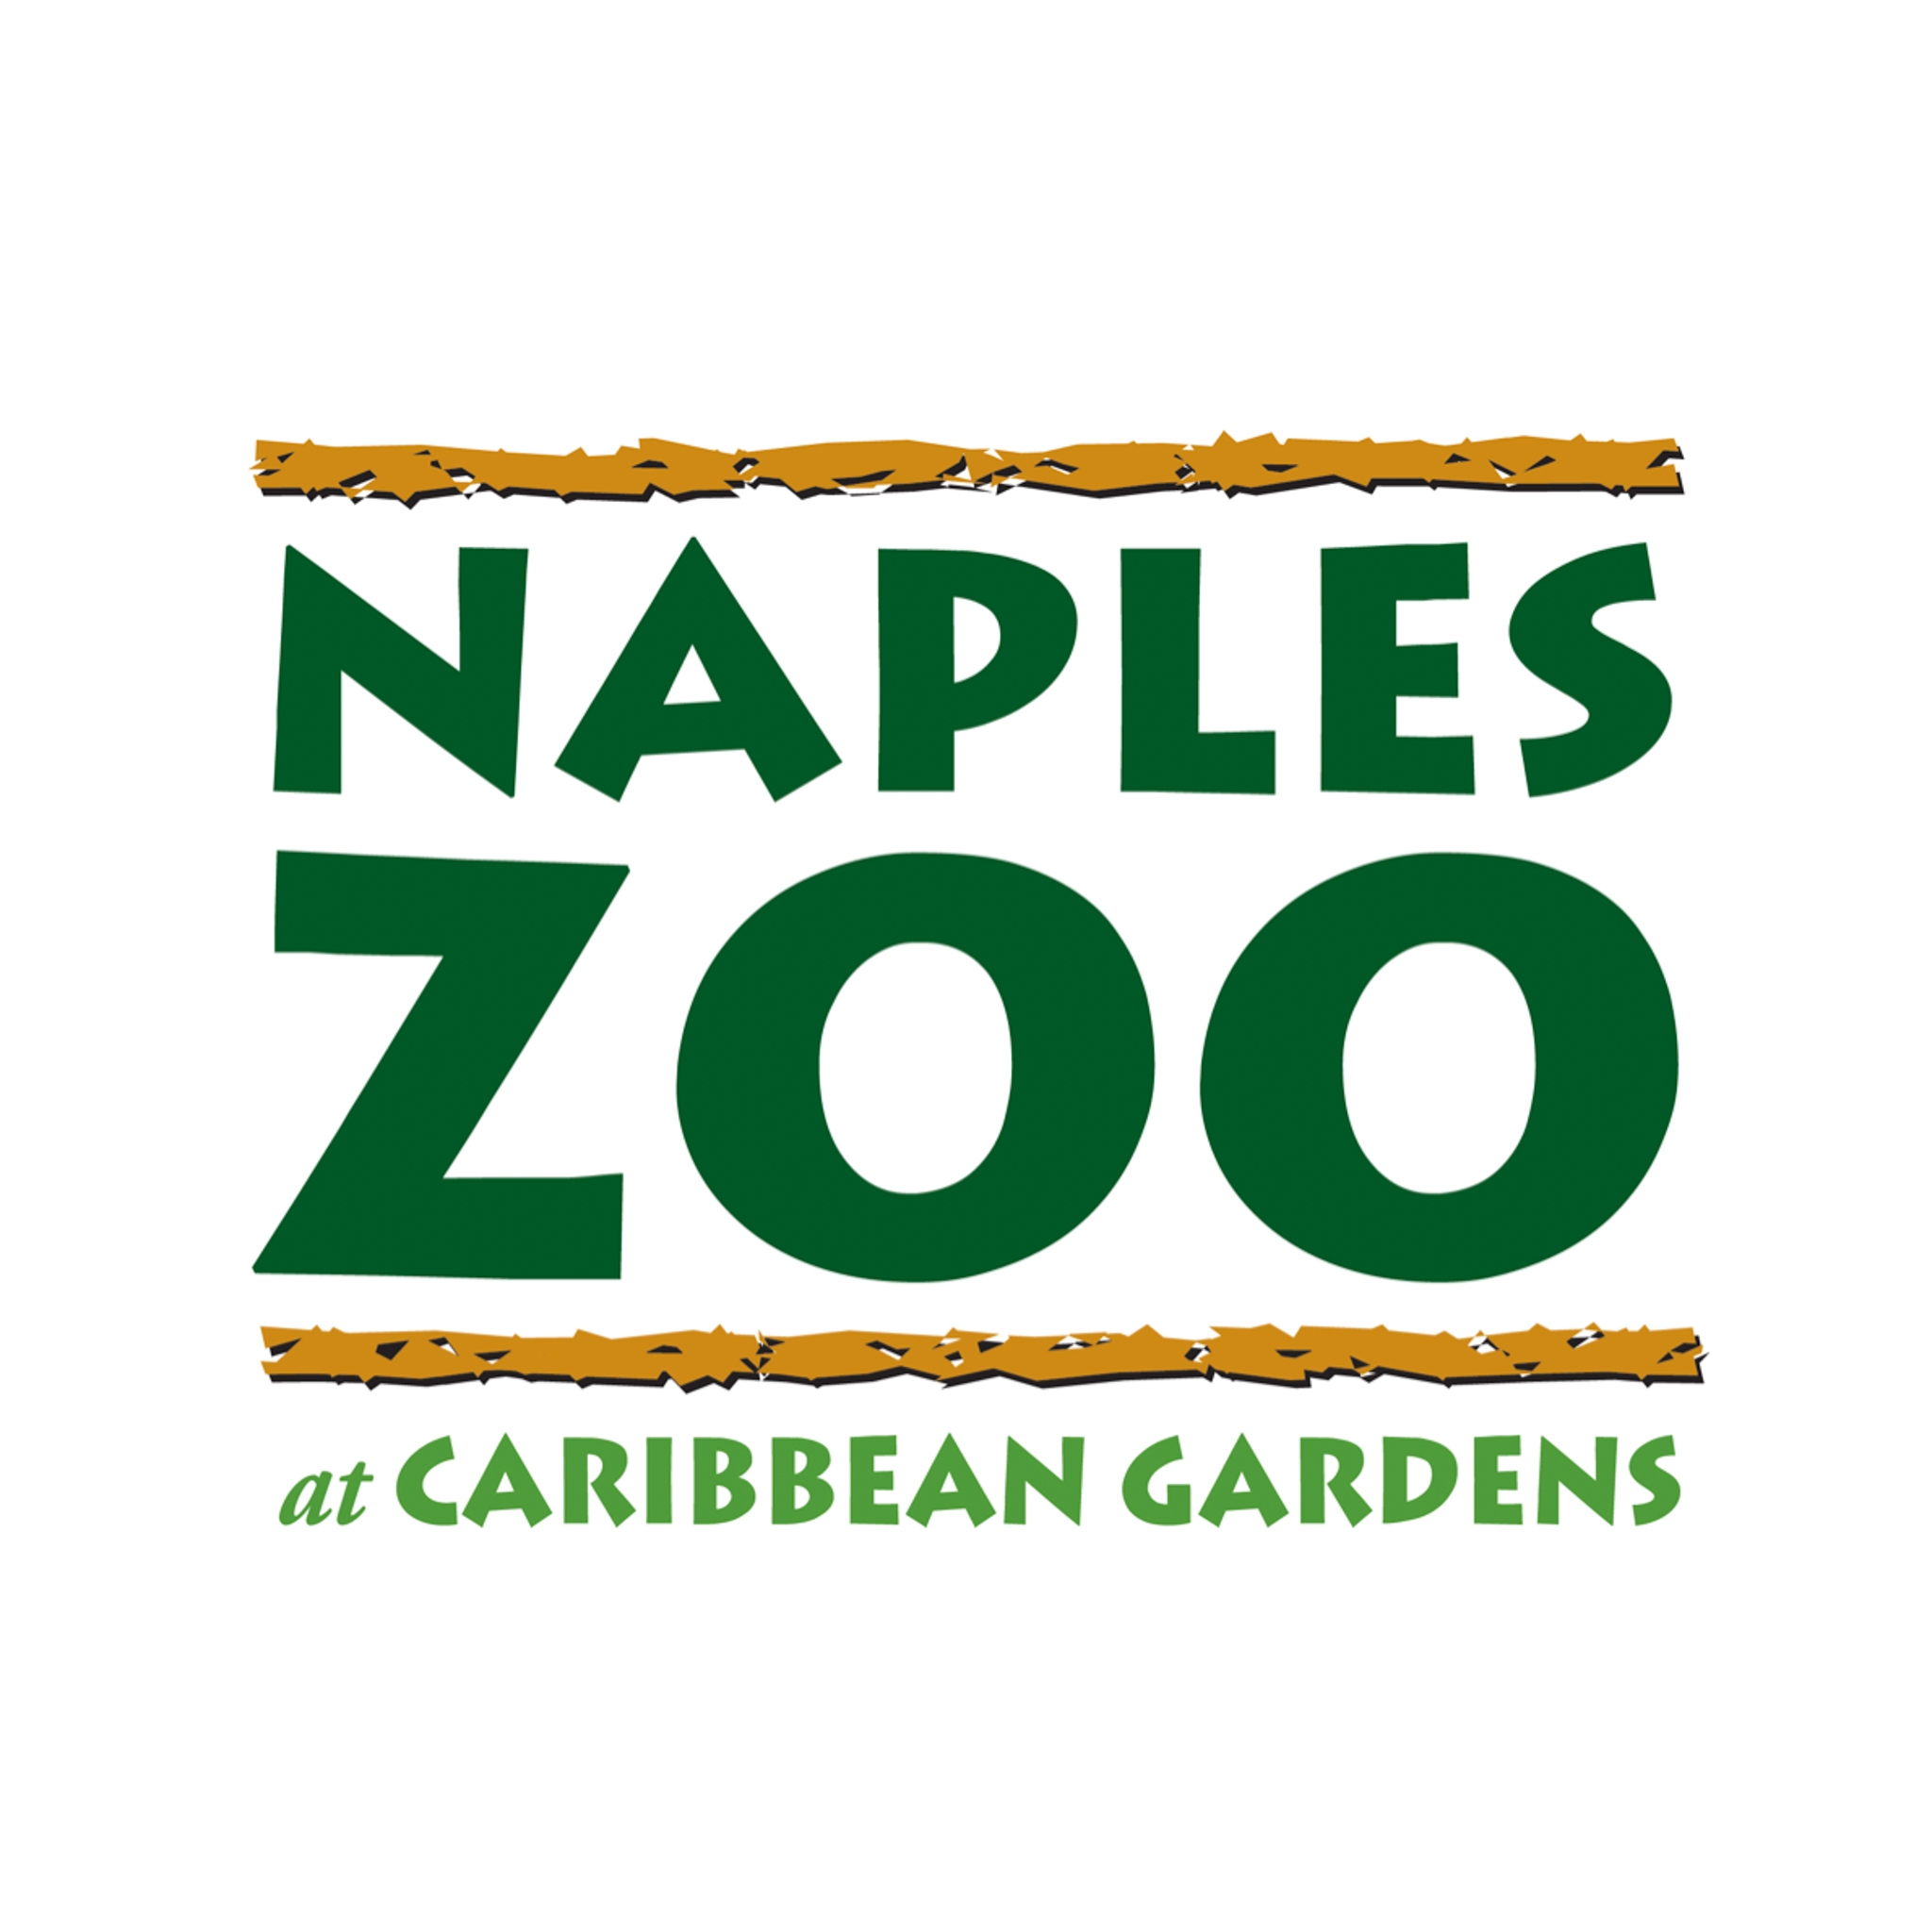 Naples Zoo at Caribbean Gardens|Museums|Travel